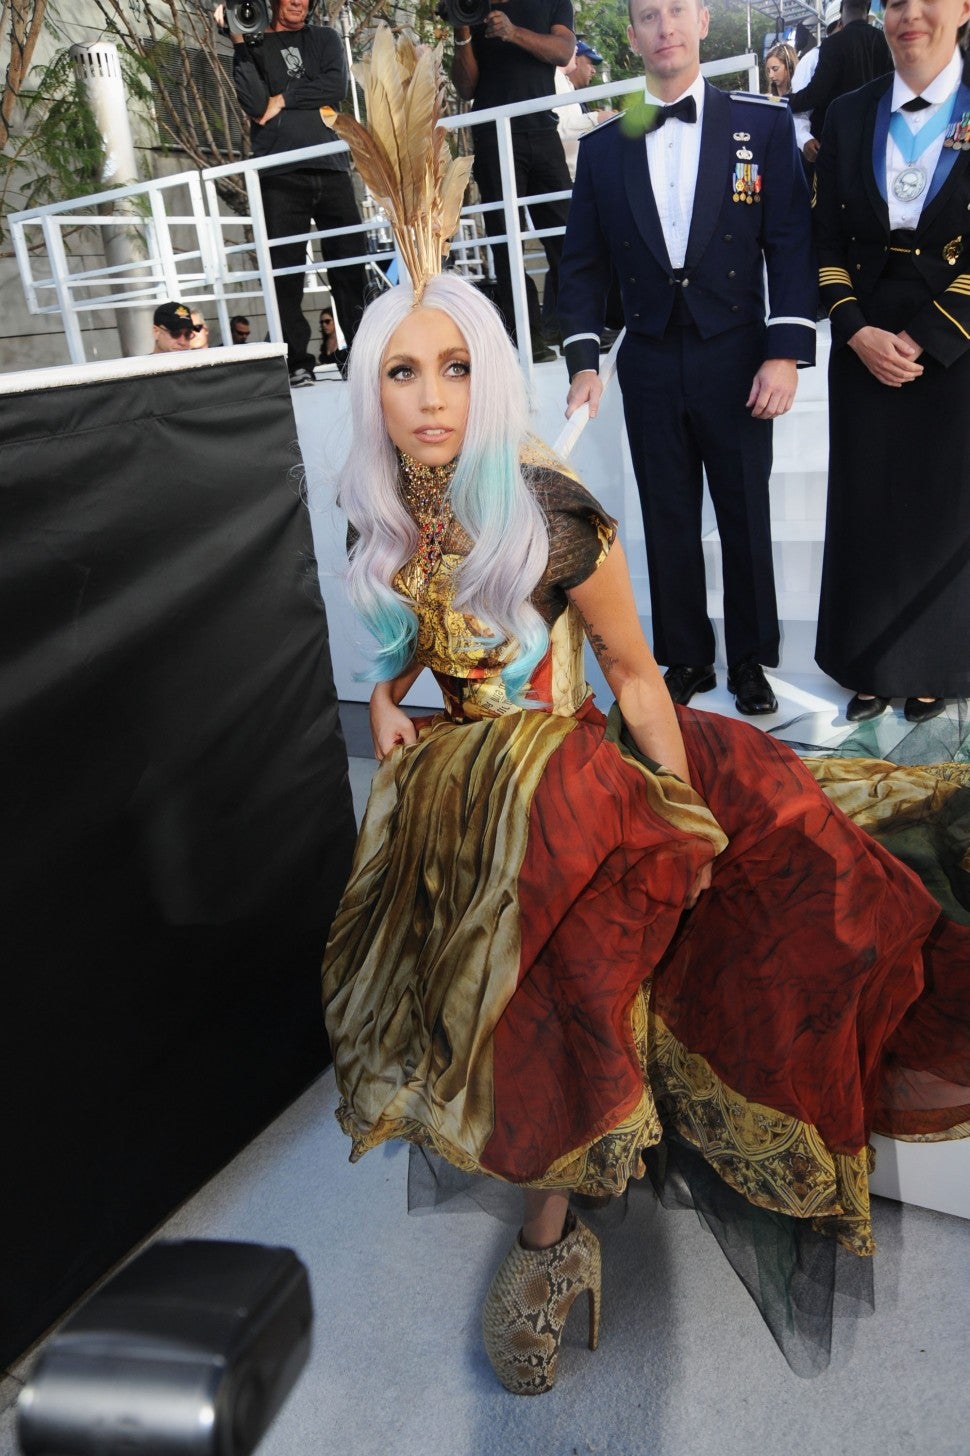 Lady Gaga arrives at the 2010 MTV Video Music Awards held at Nokia Theatre L.A. Live on September 12, 2010 in Los Angeles, California.